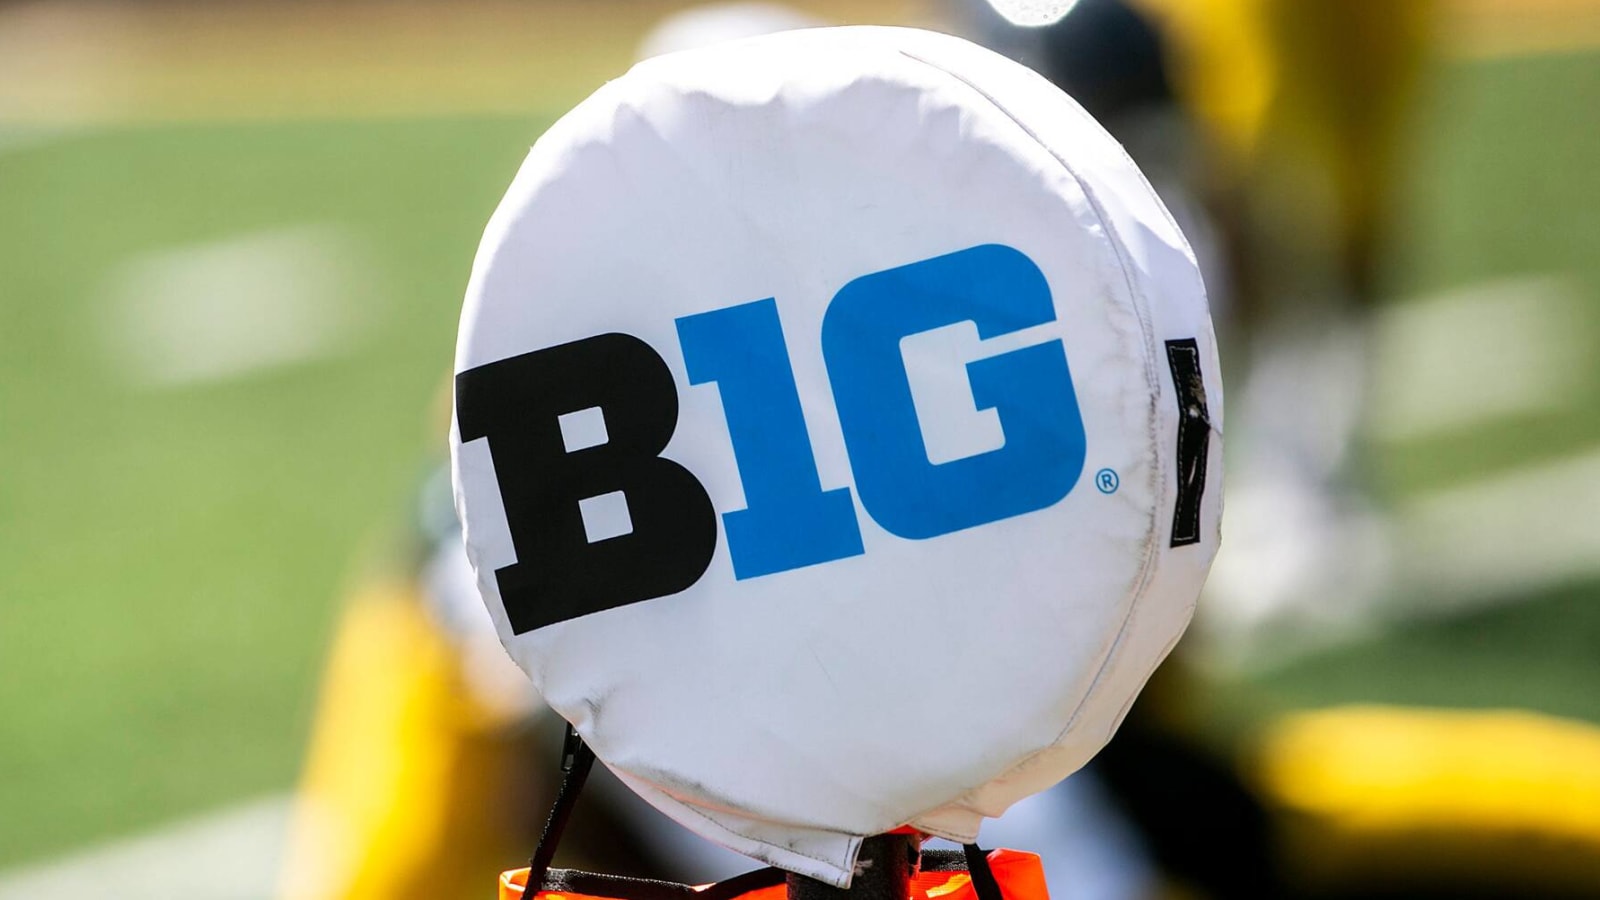 USC, UCLA announce move to Big Ten Conference